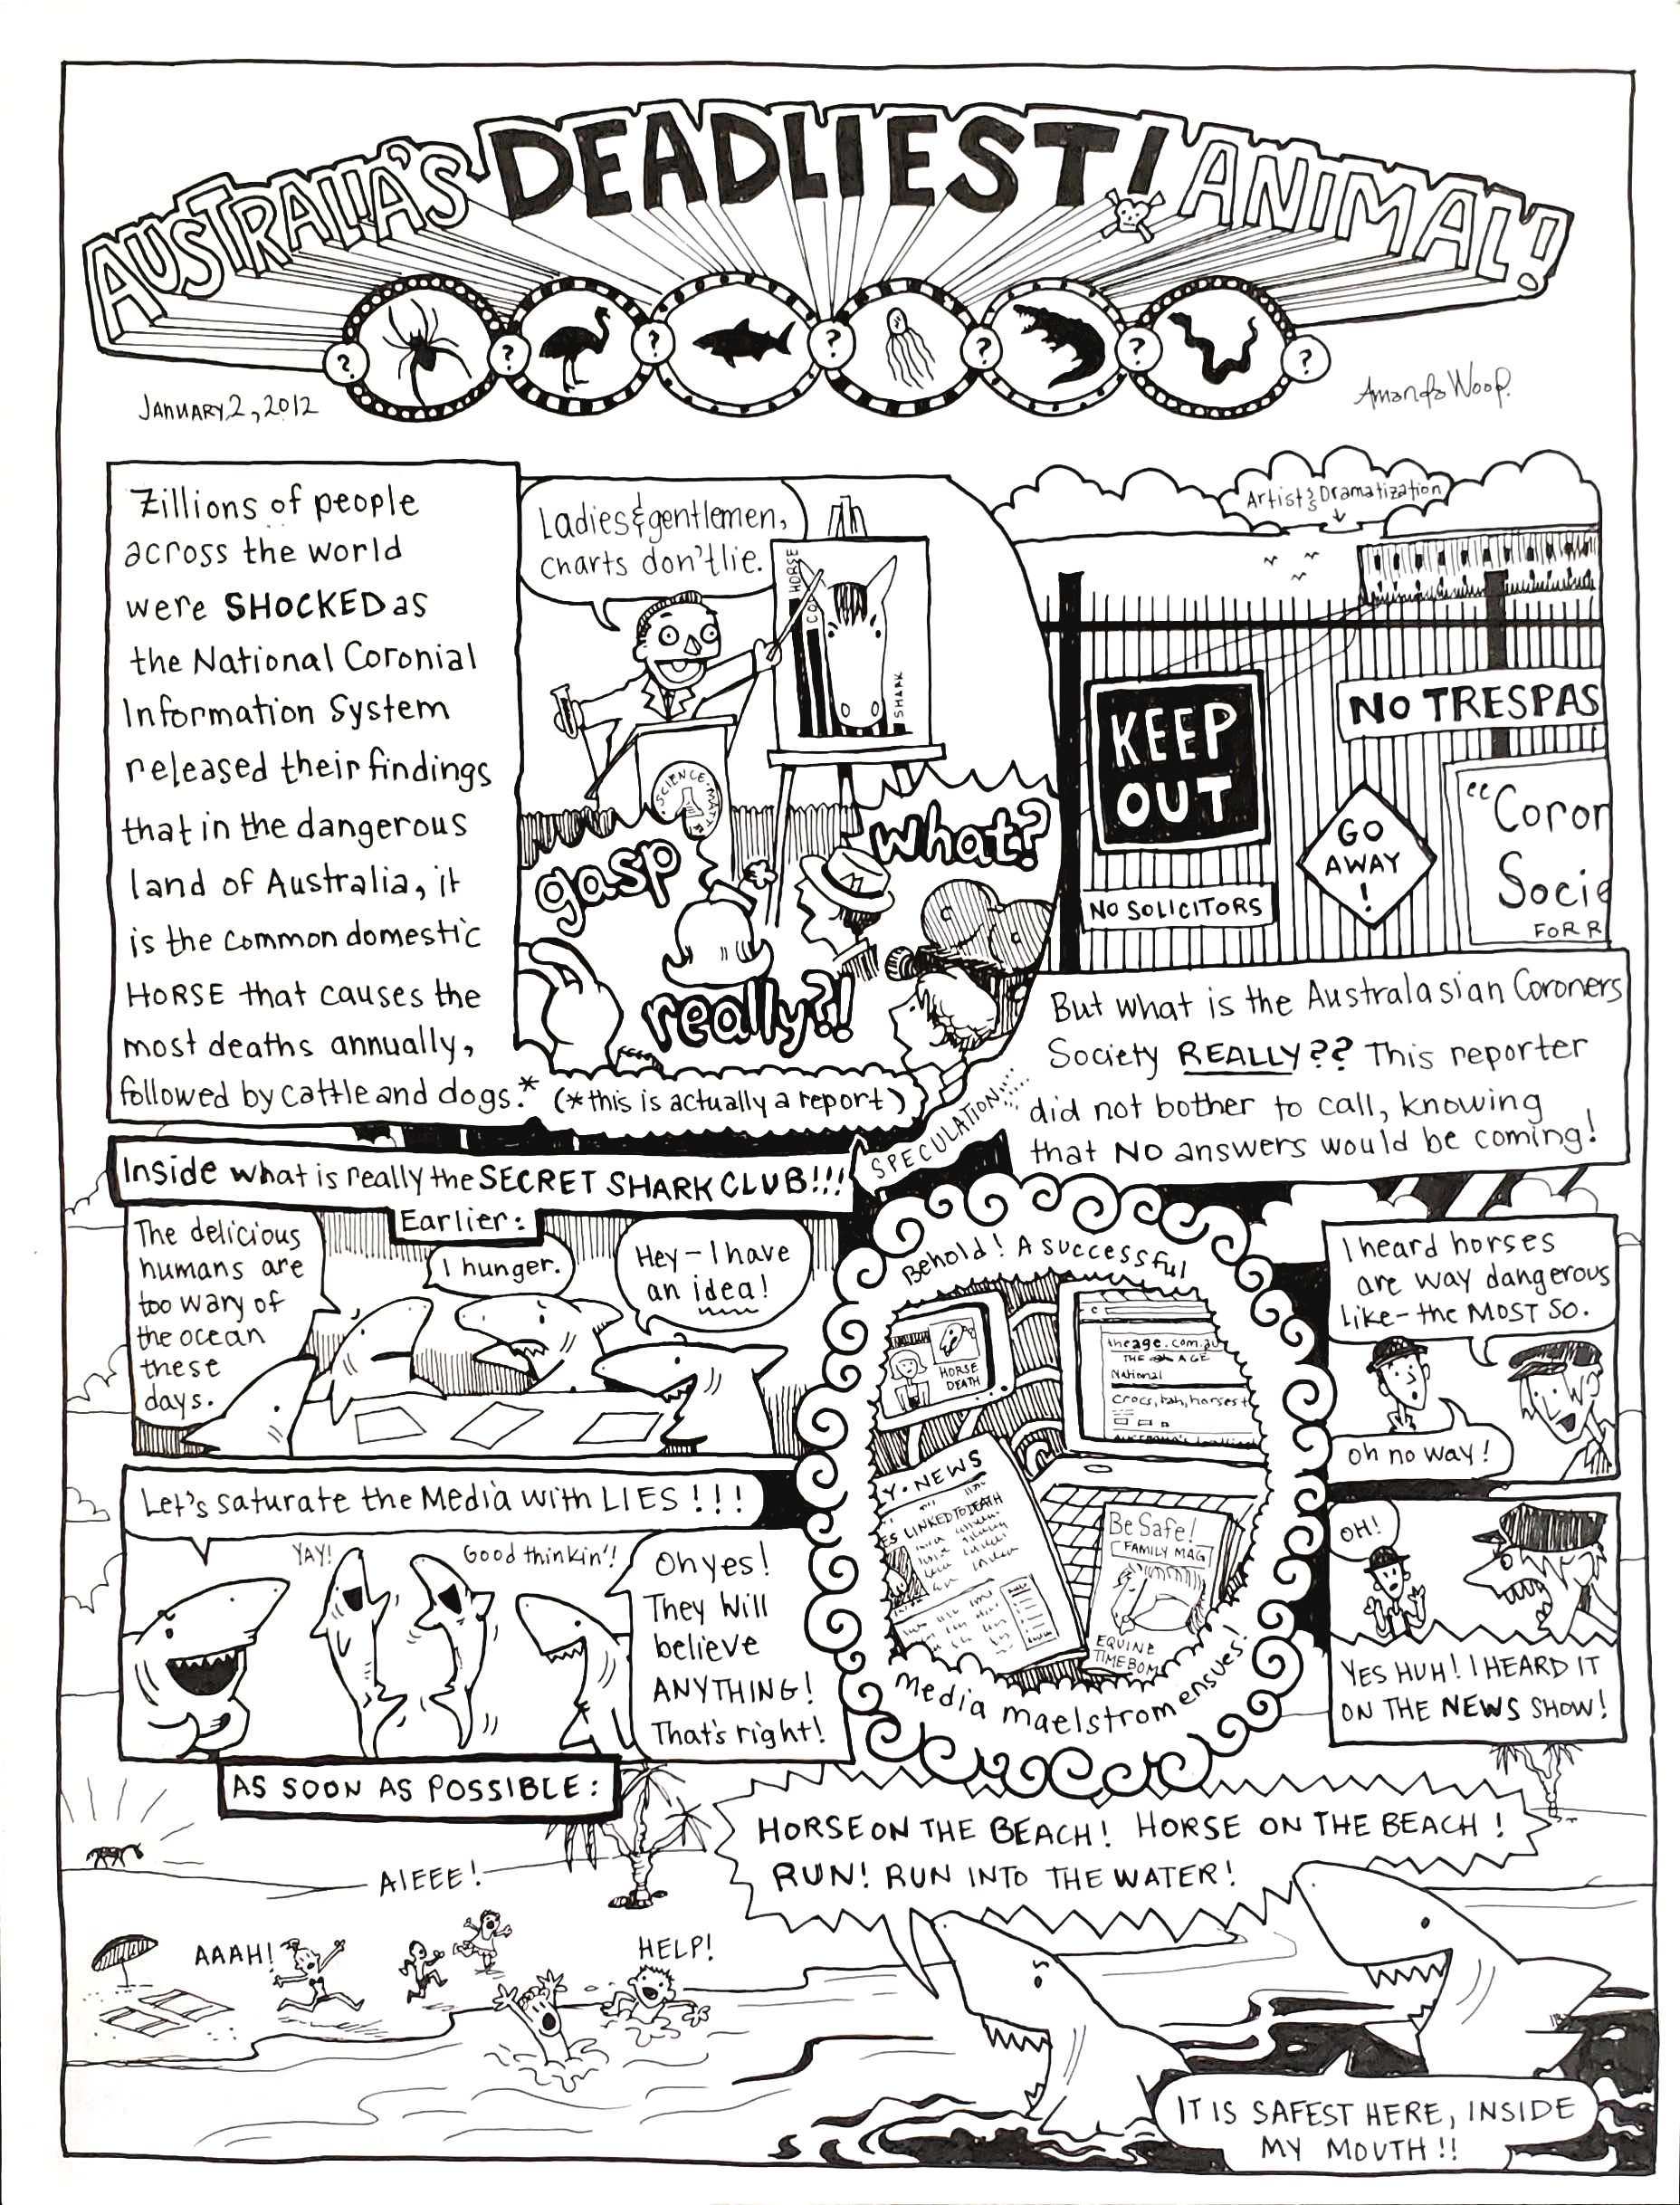 This hand drawn comic is called Australia's Deadliest Animal! It was made by Amanda Wood on January 2, 2012.

There is a lot going on on this single page comic. The panels bleed into each other and there are so many words. But I will summarize.

A scientist puppet from the National Coronial Information System is giving a report. He is pointing to a chart with a horse head on it. He is telling the gathered press that the most dangerous animal in Australia, the one that causes the most death, is the Common Horse (this is true. This was a real report). 

But the comic asks "what is the Australiasian Coroner's Society *really*?" So we get to see inside to find that there is a gathering of sharks brainstorming because they are hungry. They decide to saturate the media with lies about how dangerous horses are. Their scheme works!

The final, largest panel shows beach goers fleeing into the water because there is a horse on the horizon. The sharks are in the water shouting things like, "Horse on the beach! Run! Run into the water!" and "It's safest here, inside my mouth!"